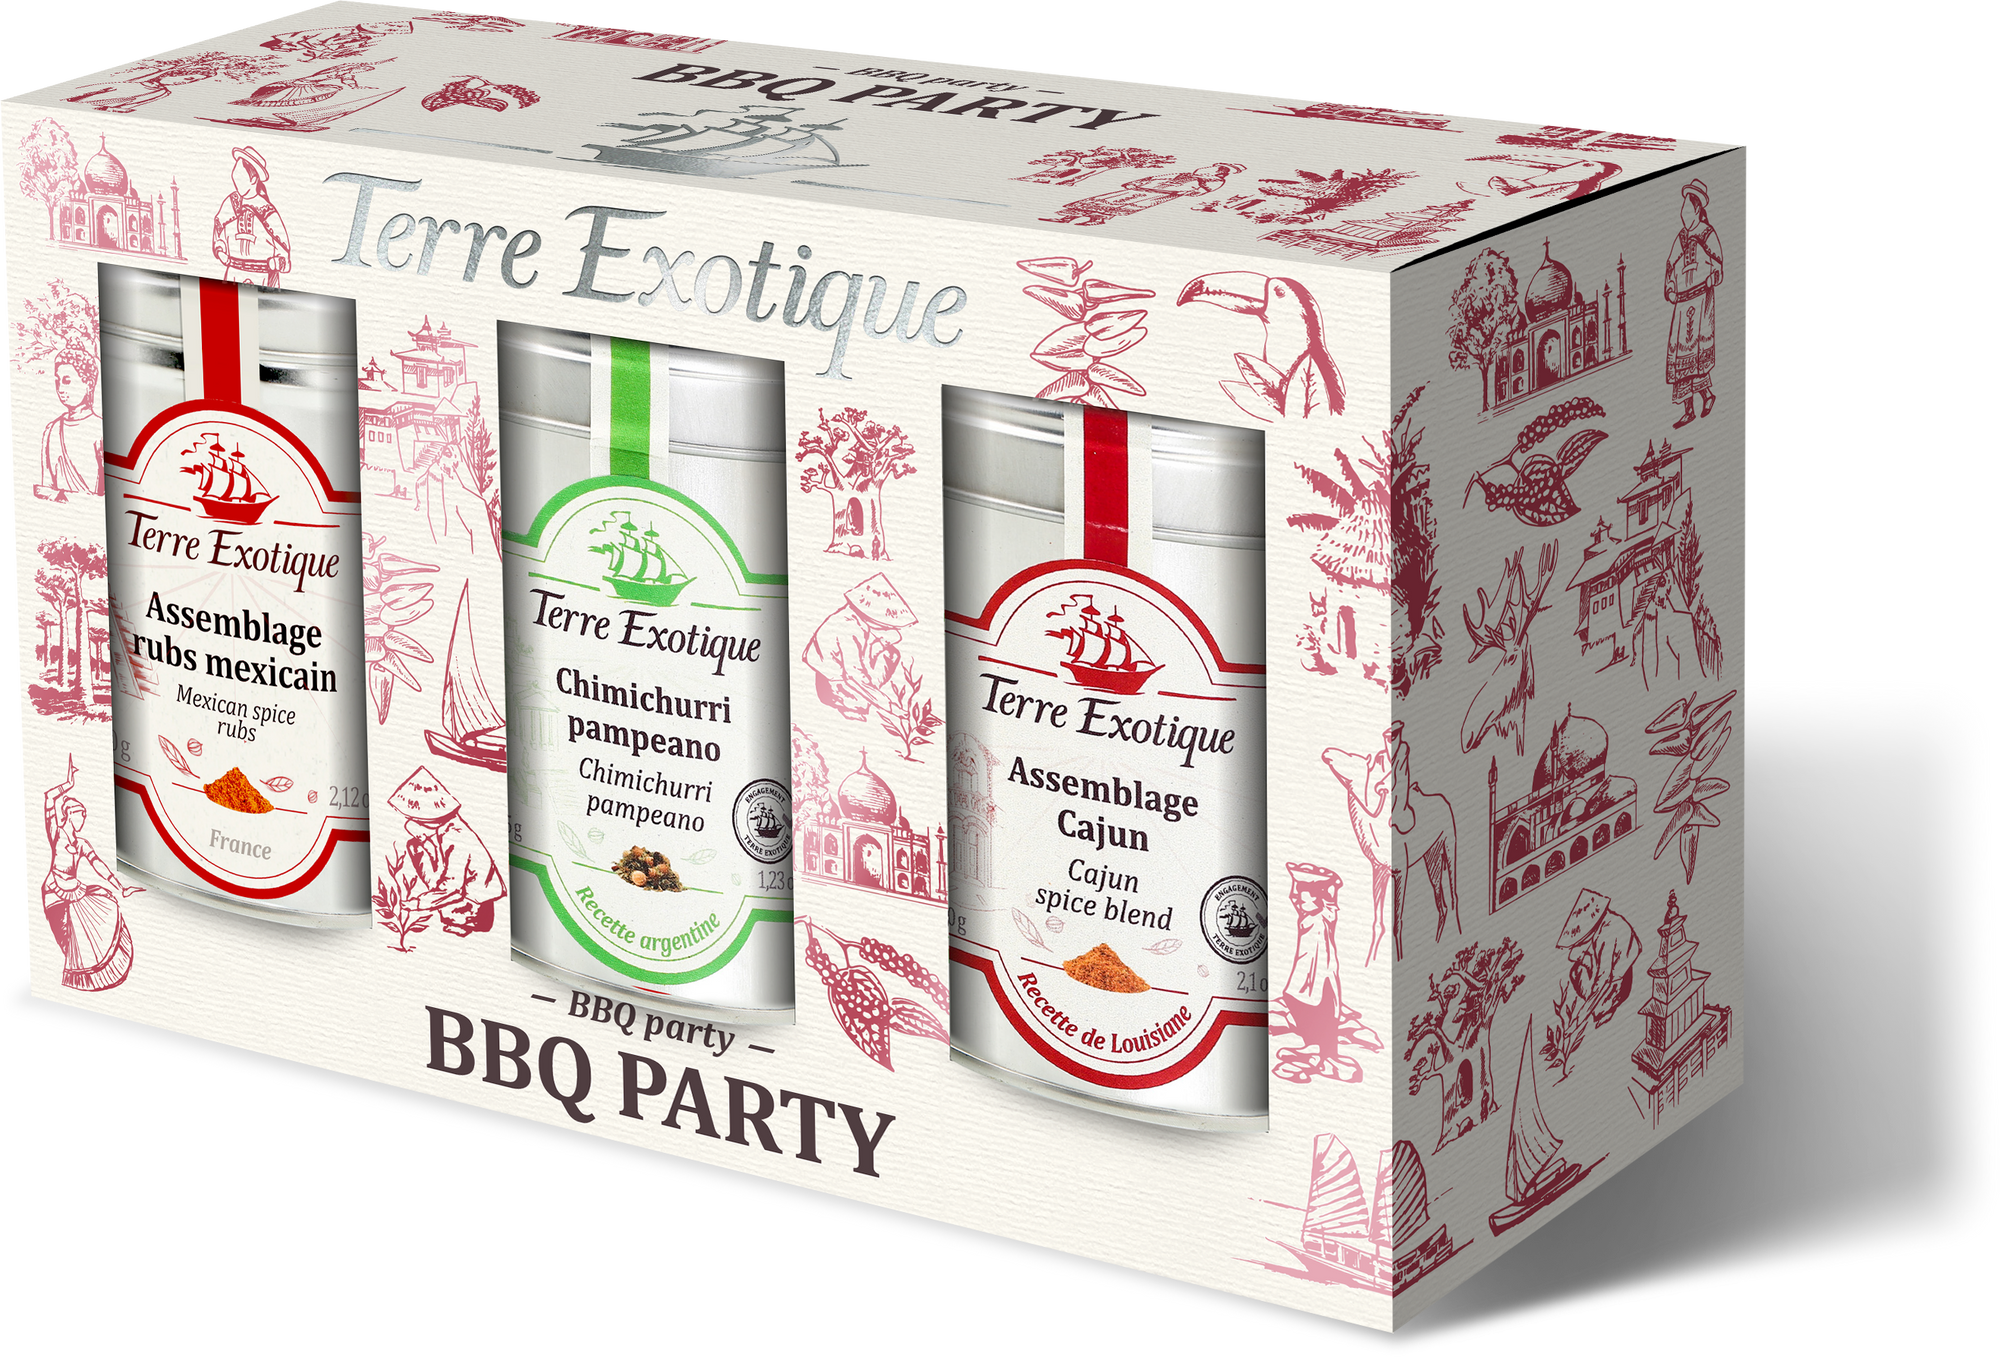 Terre Exotique 'BBQ Party' Gift Box